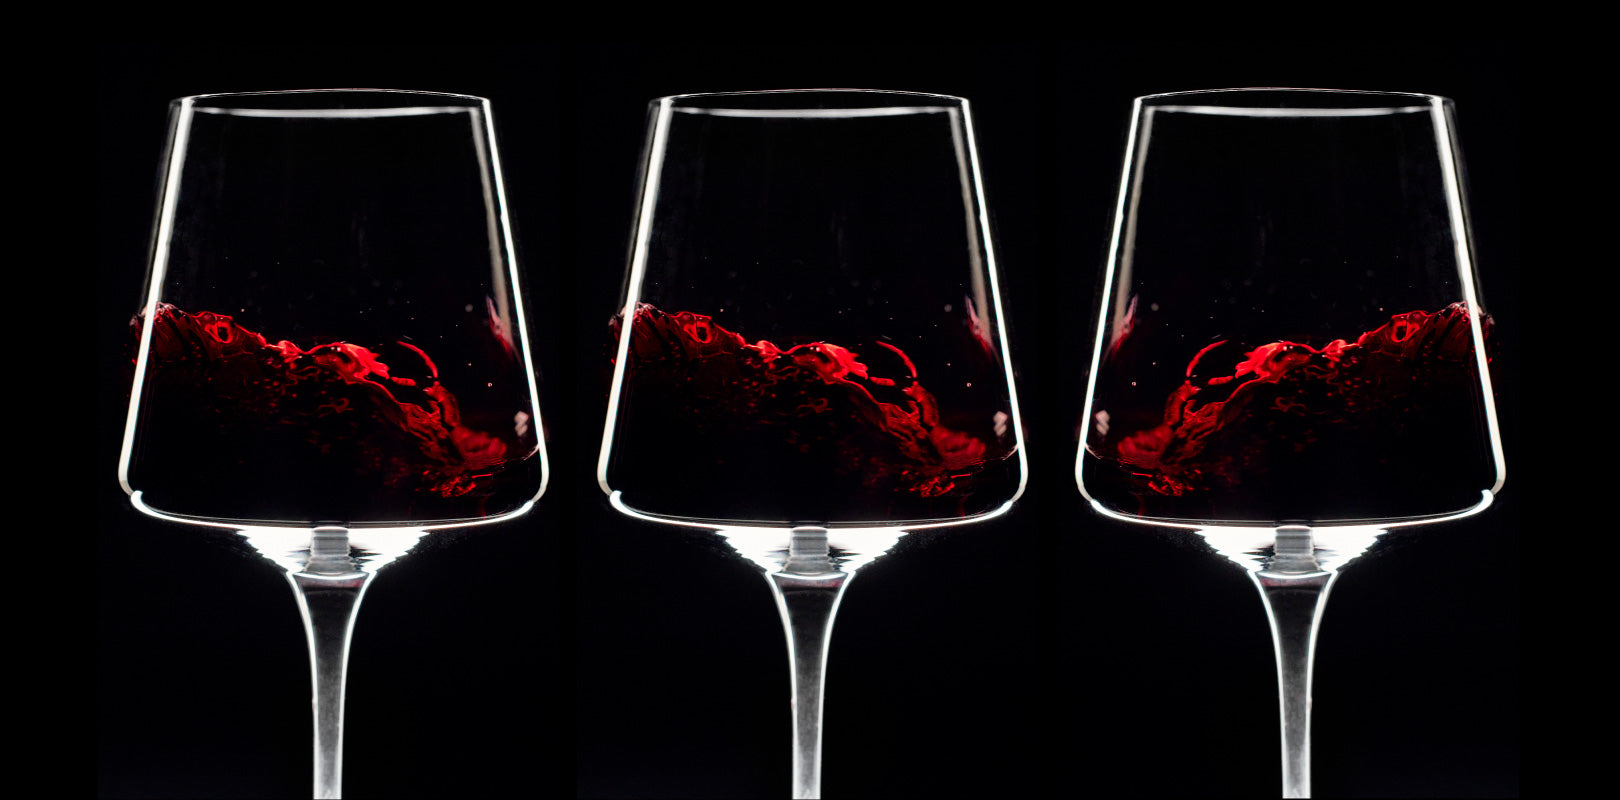 Three wine glasses filled with ethereal red wine